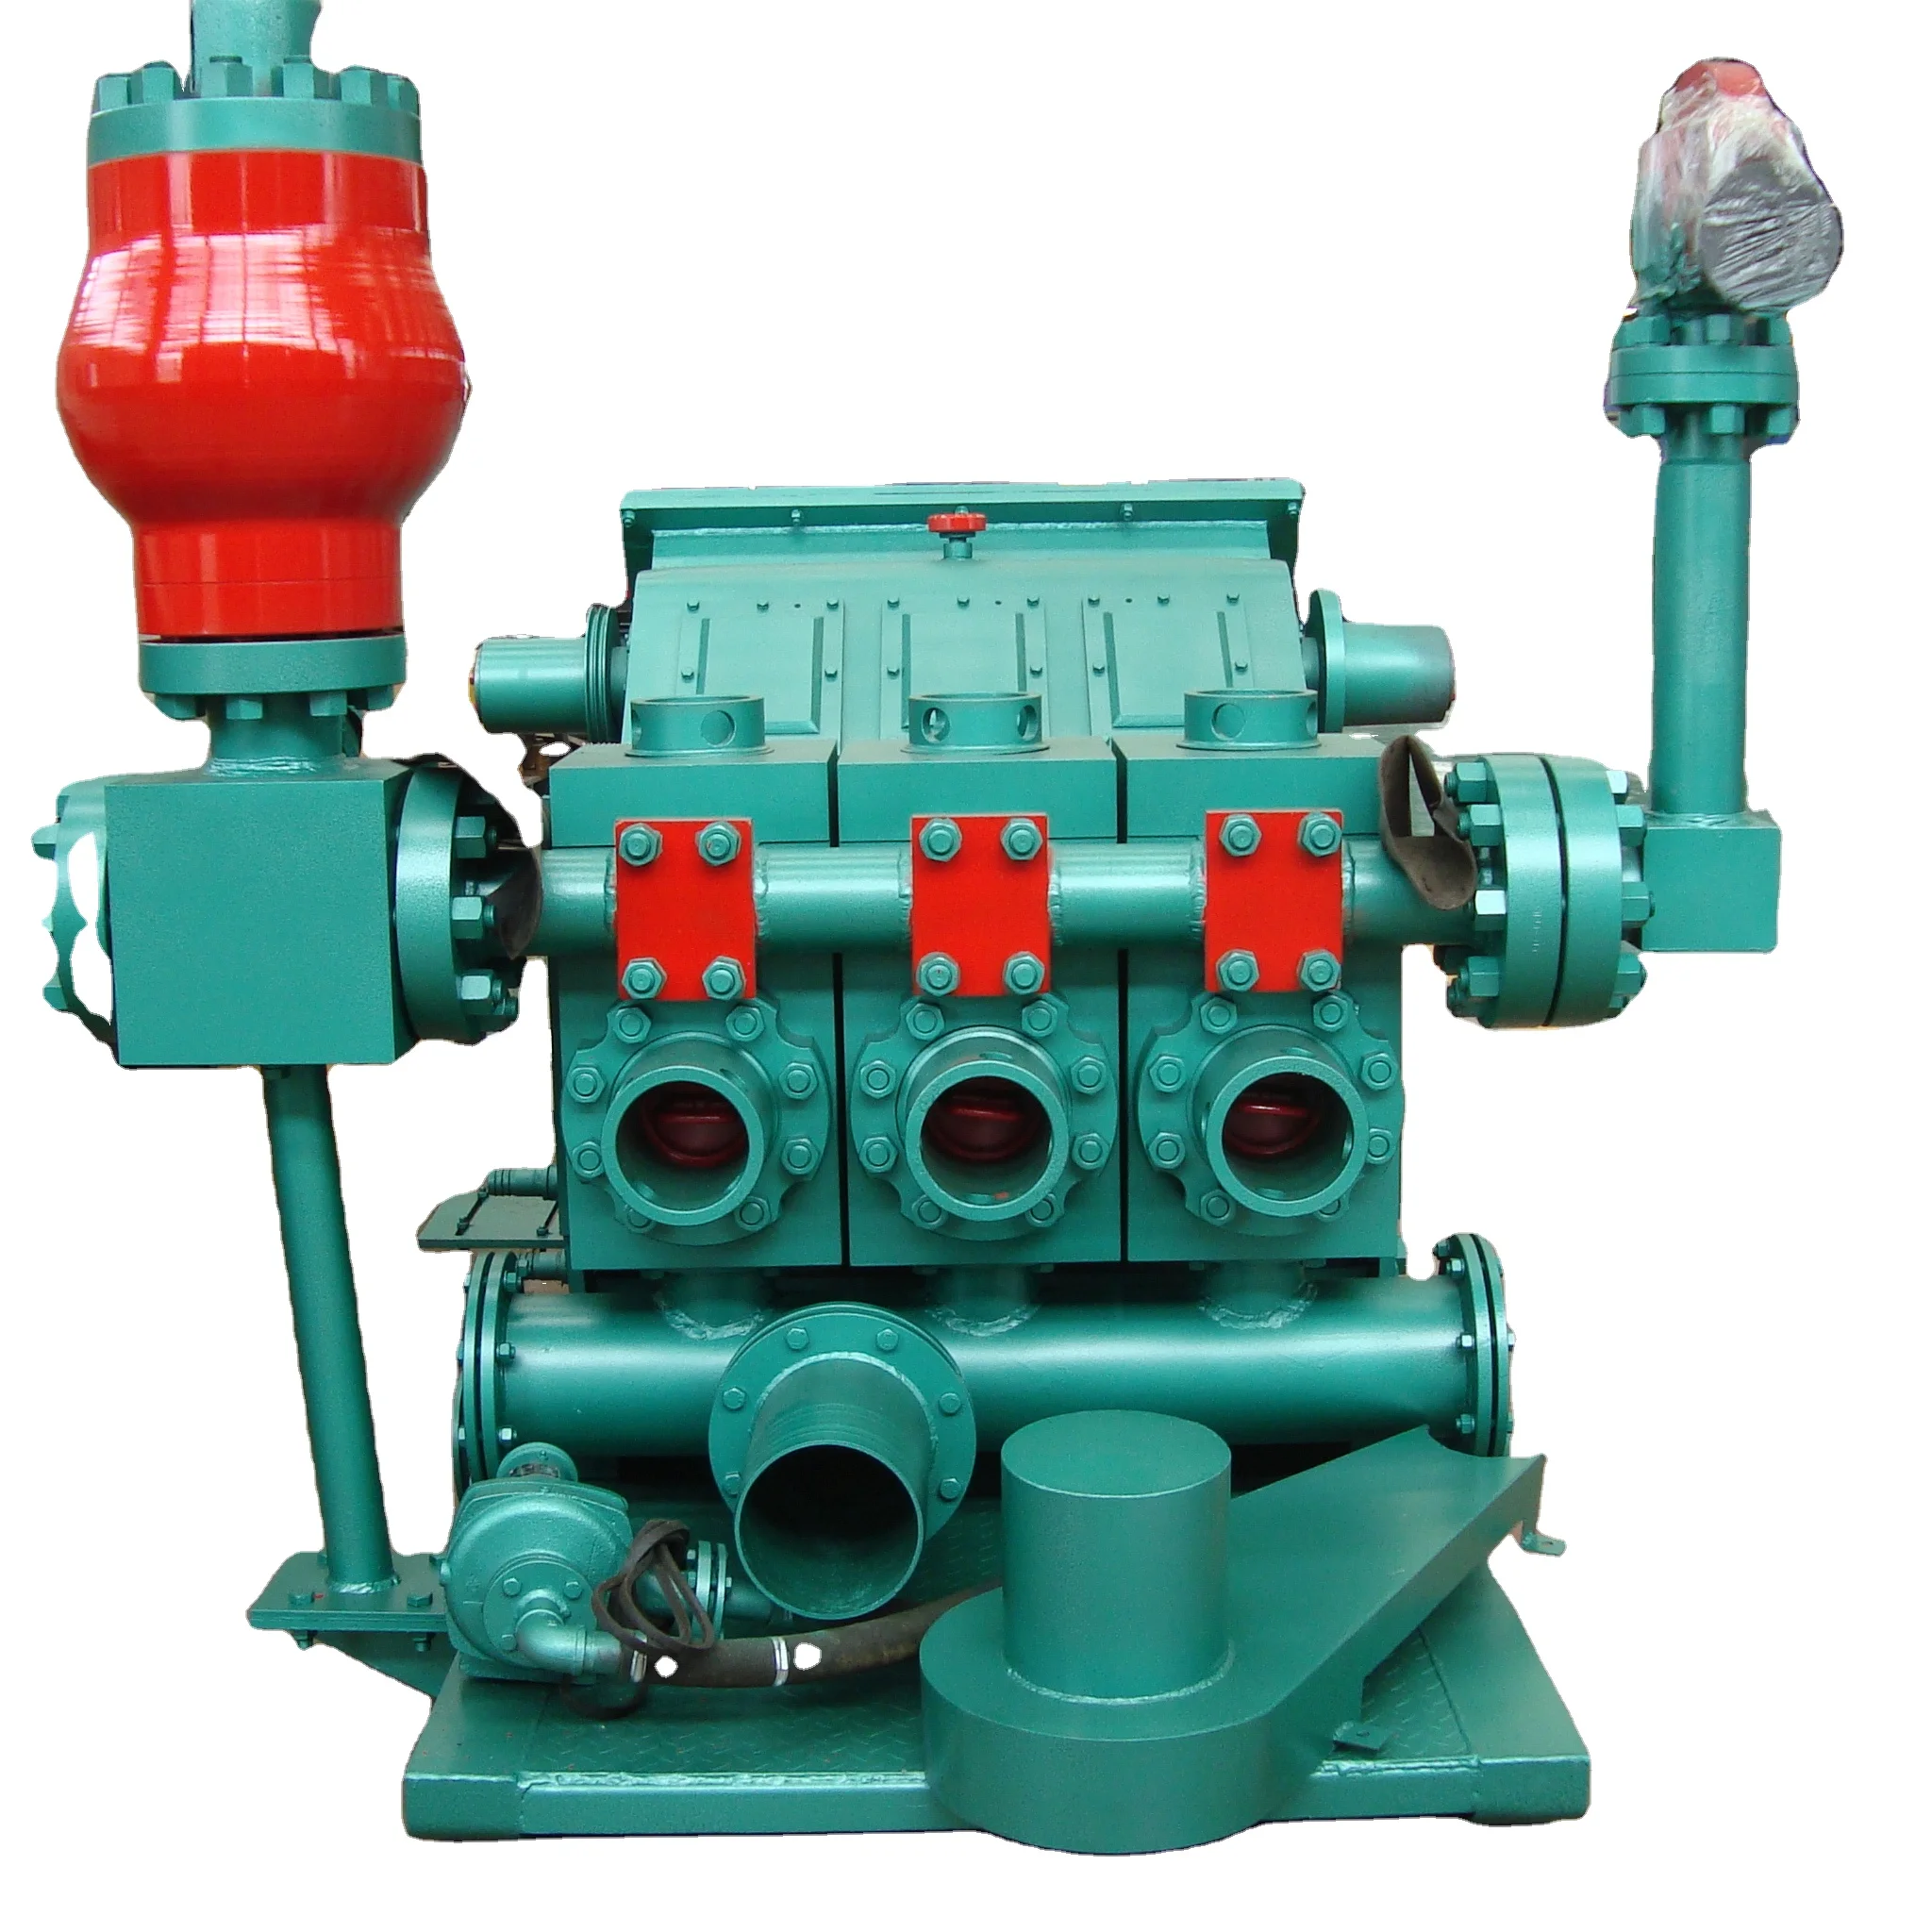 3NB350 Mud Pump for Oil and Gas Extraction Drilling Rig use pump